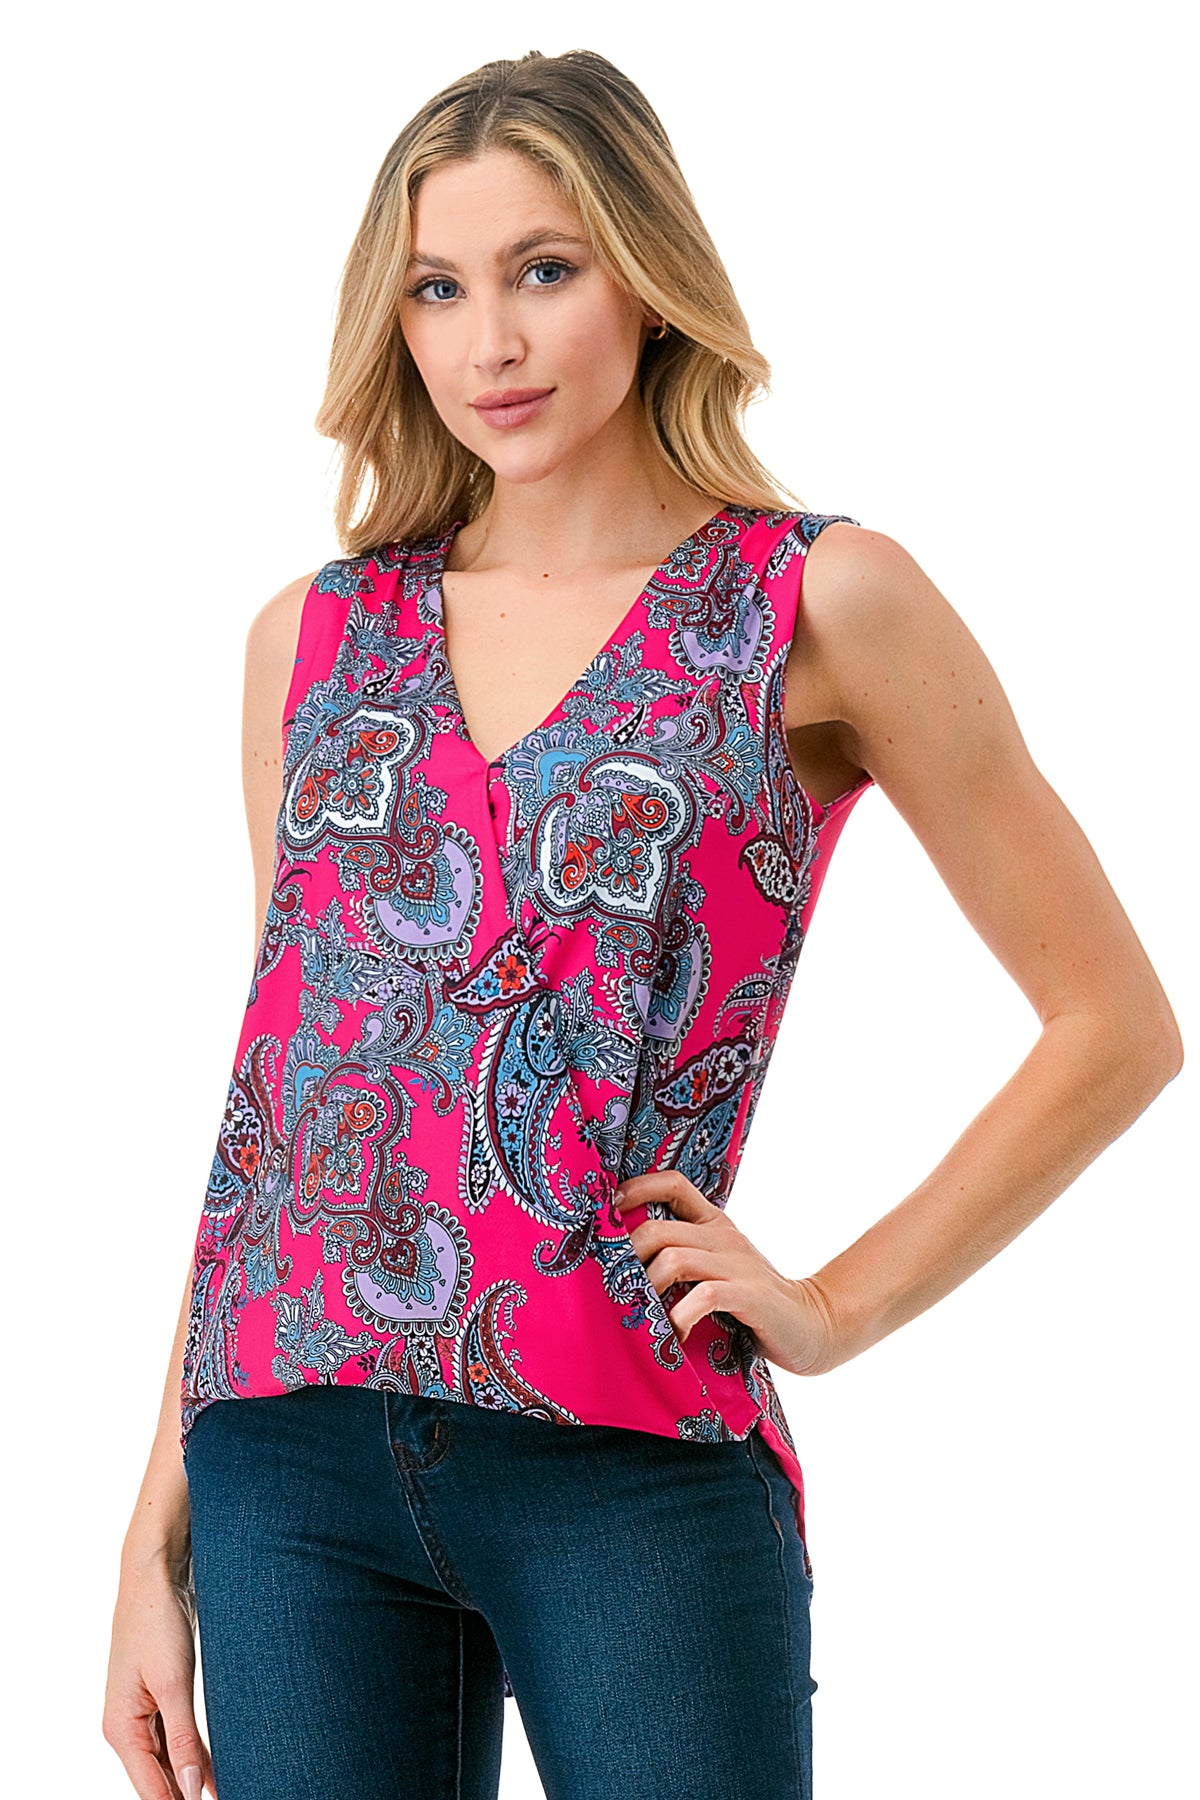 ANOUK SURPLICE HIGH AND LOW TOP (HOT PINK PAISLEY)- VT3201